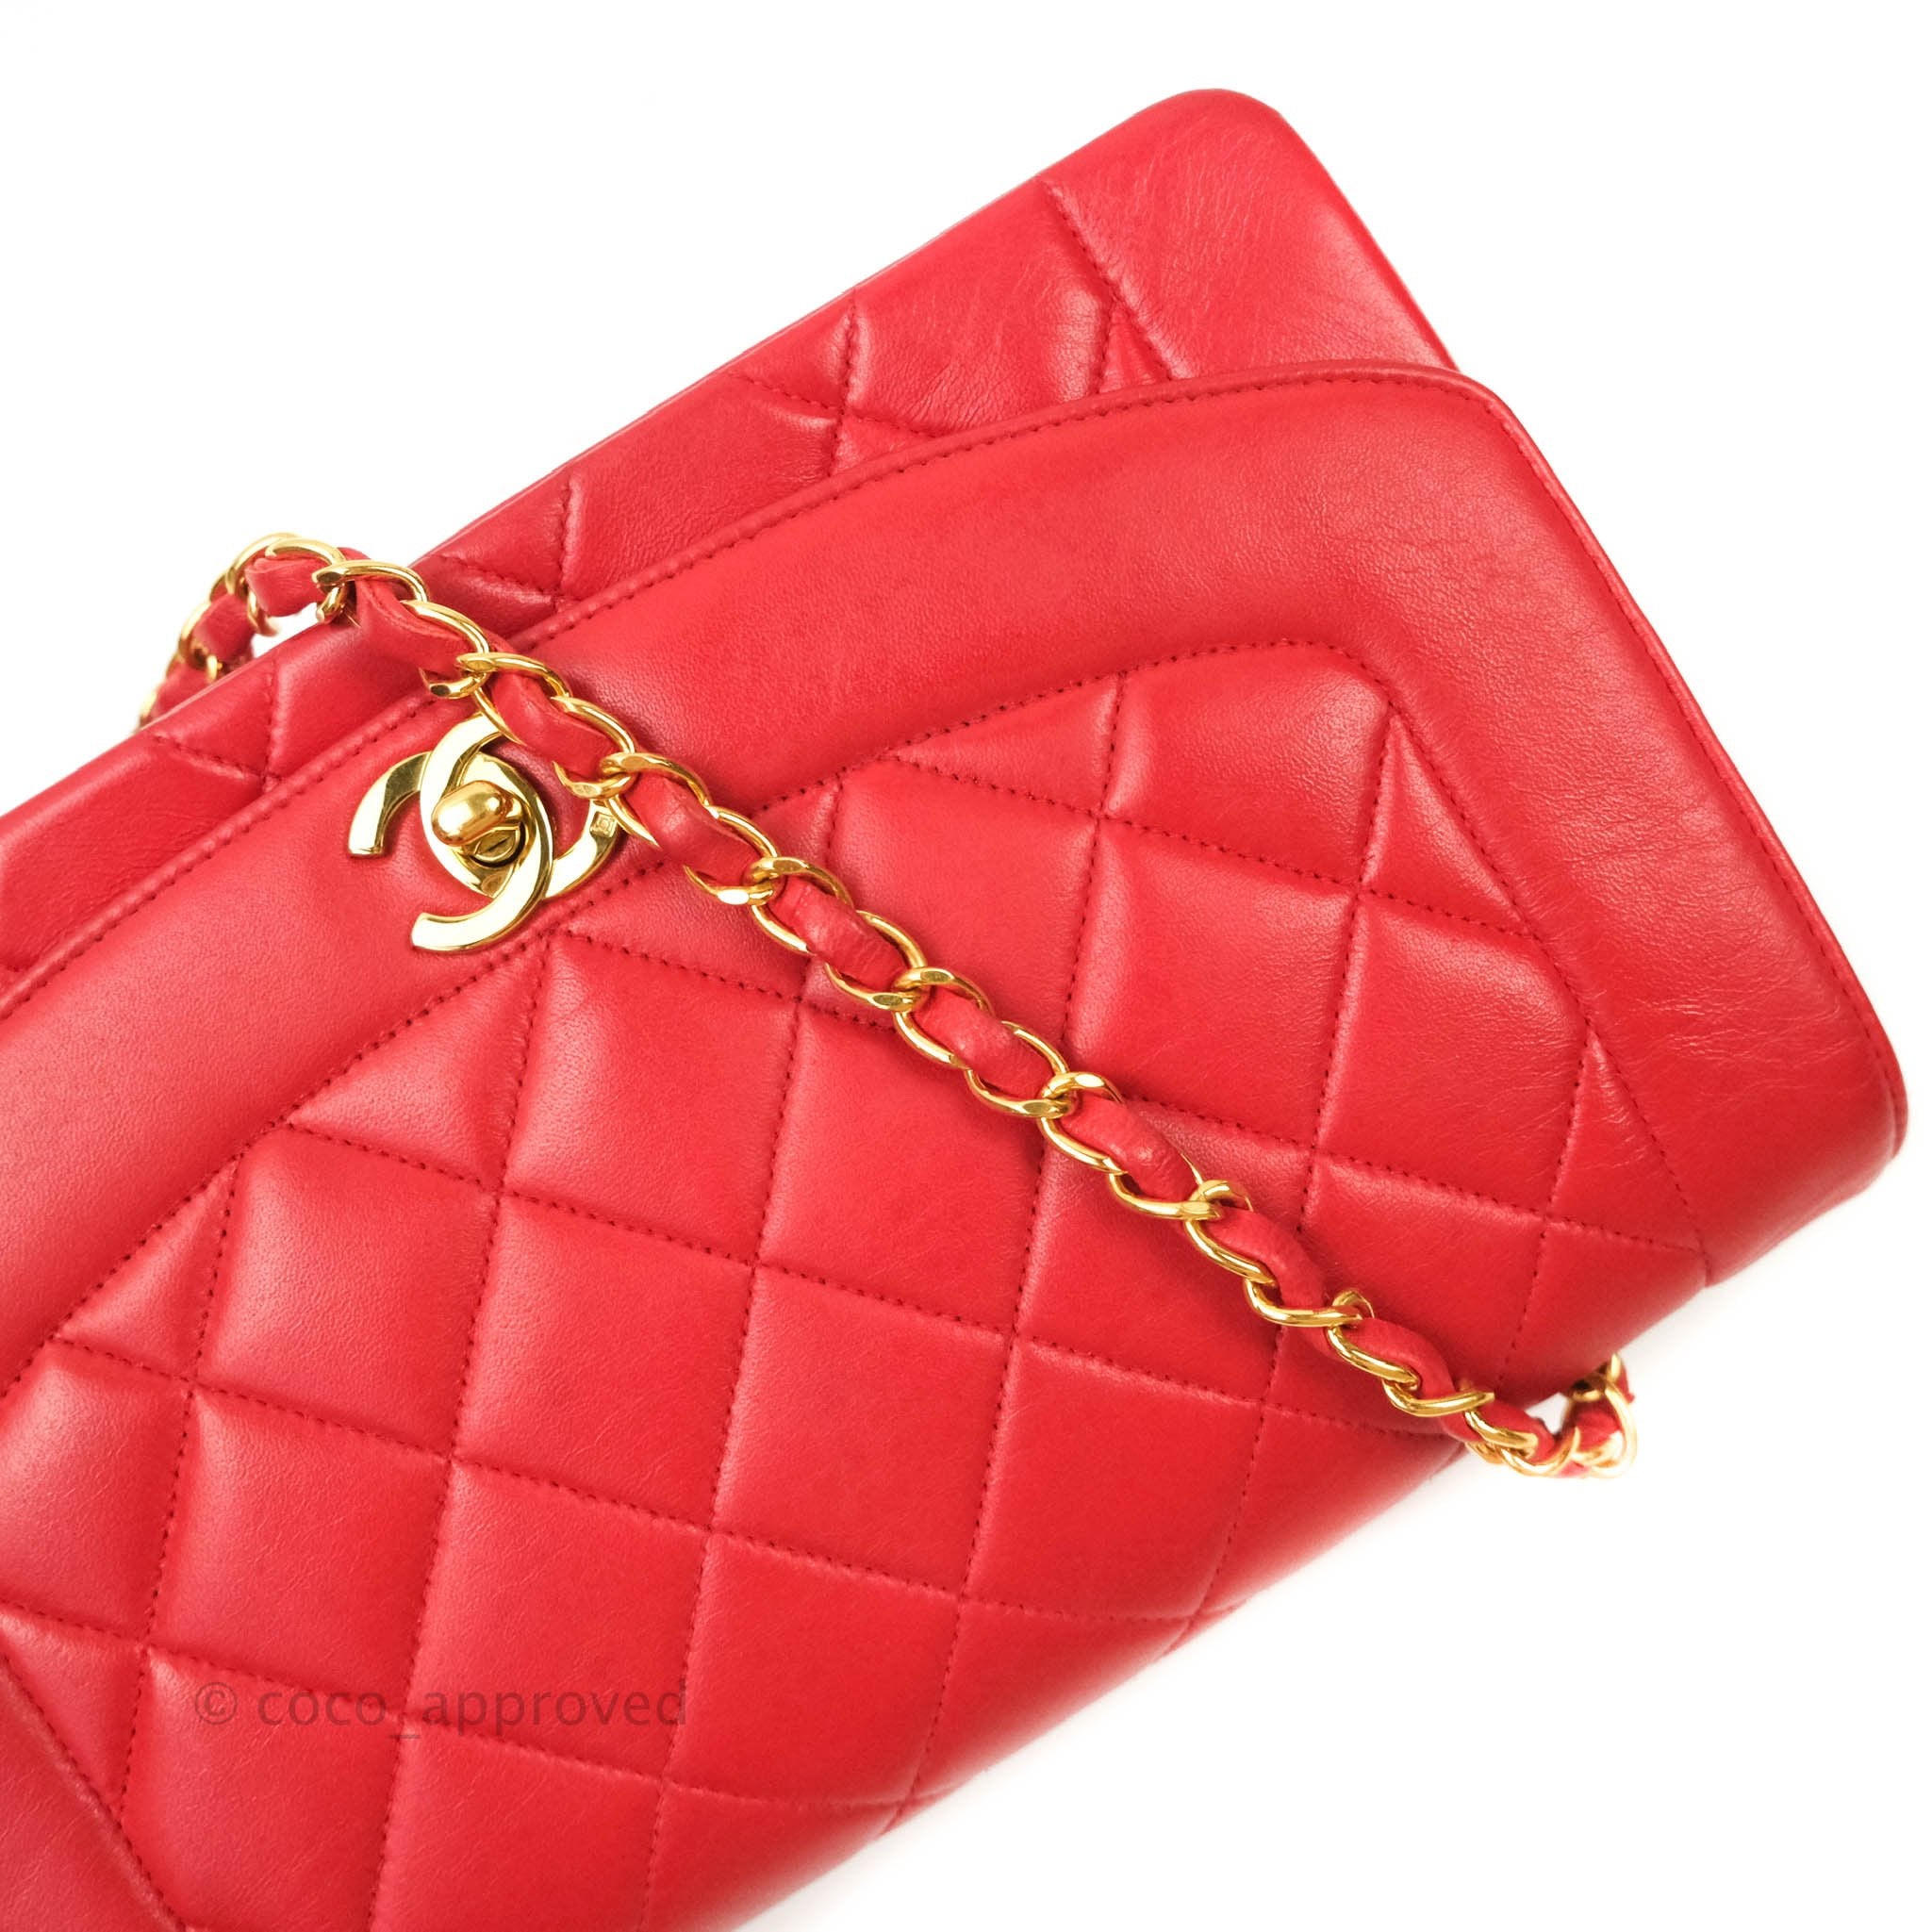 Chanel Red Quilted Lambskin Medium Vintage Classic Diana Flap Bag